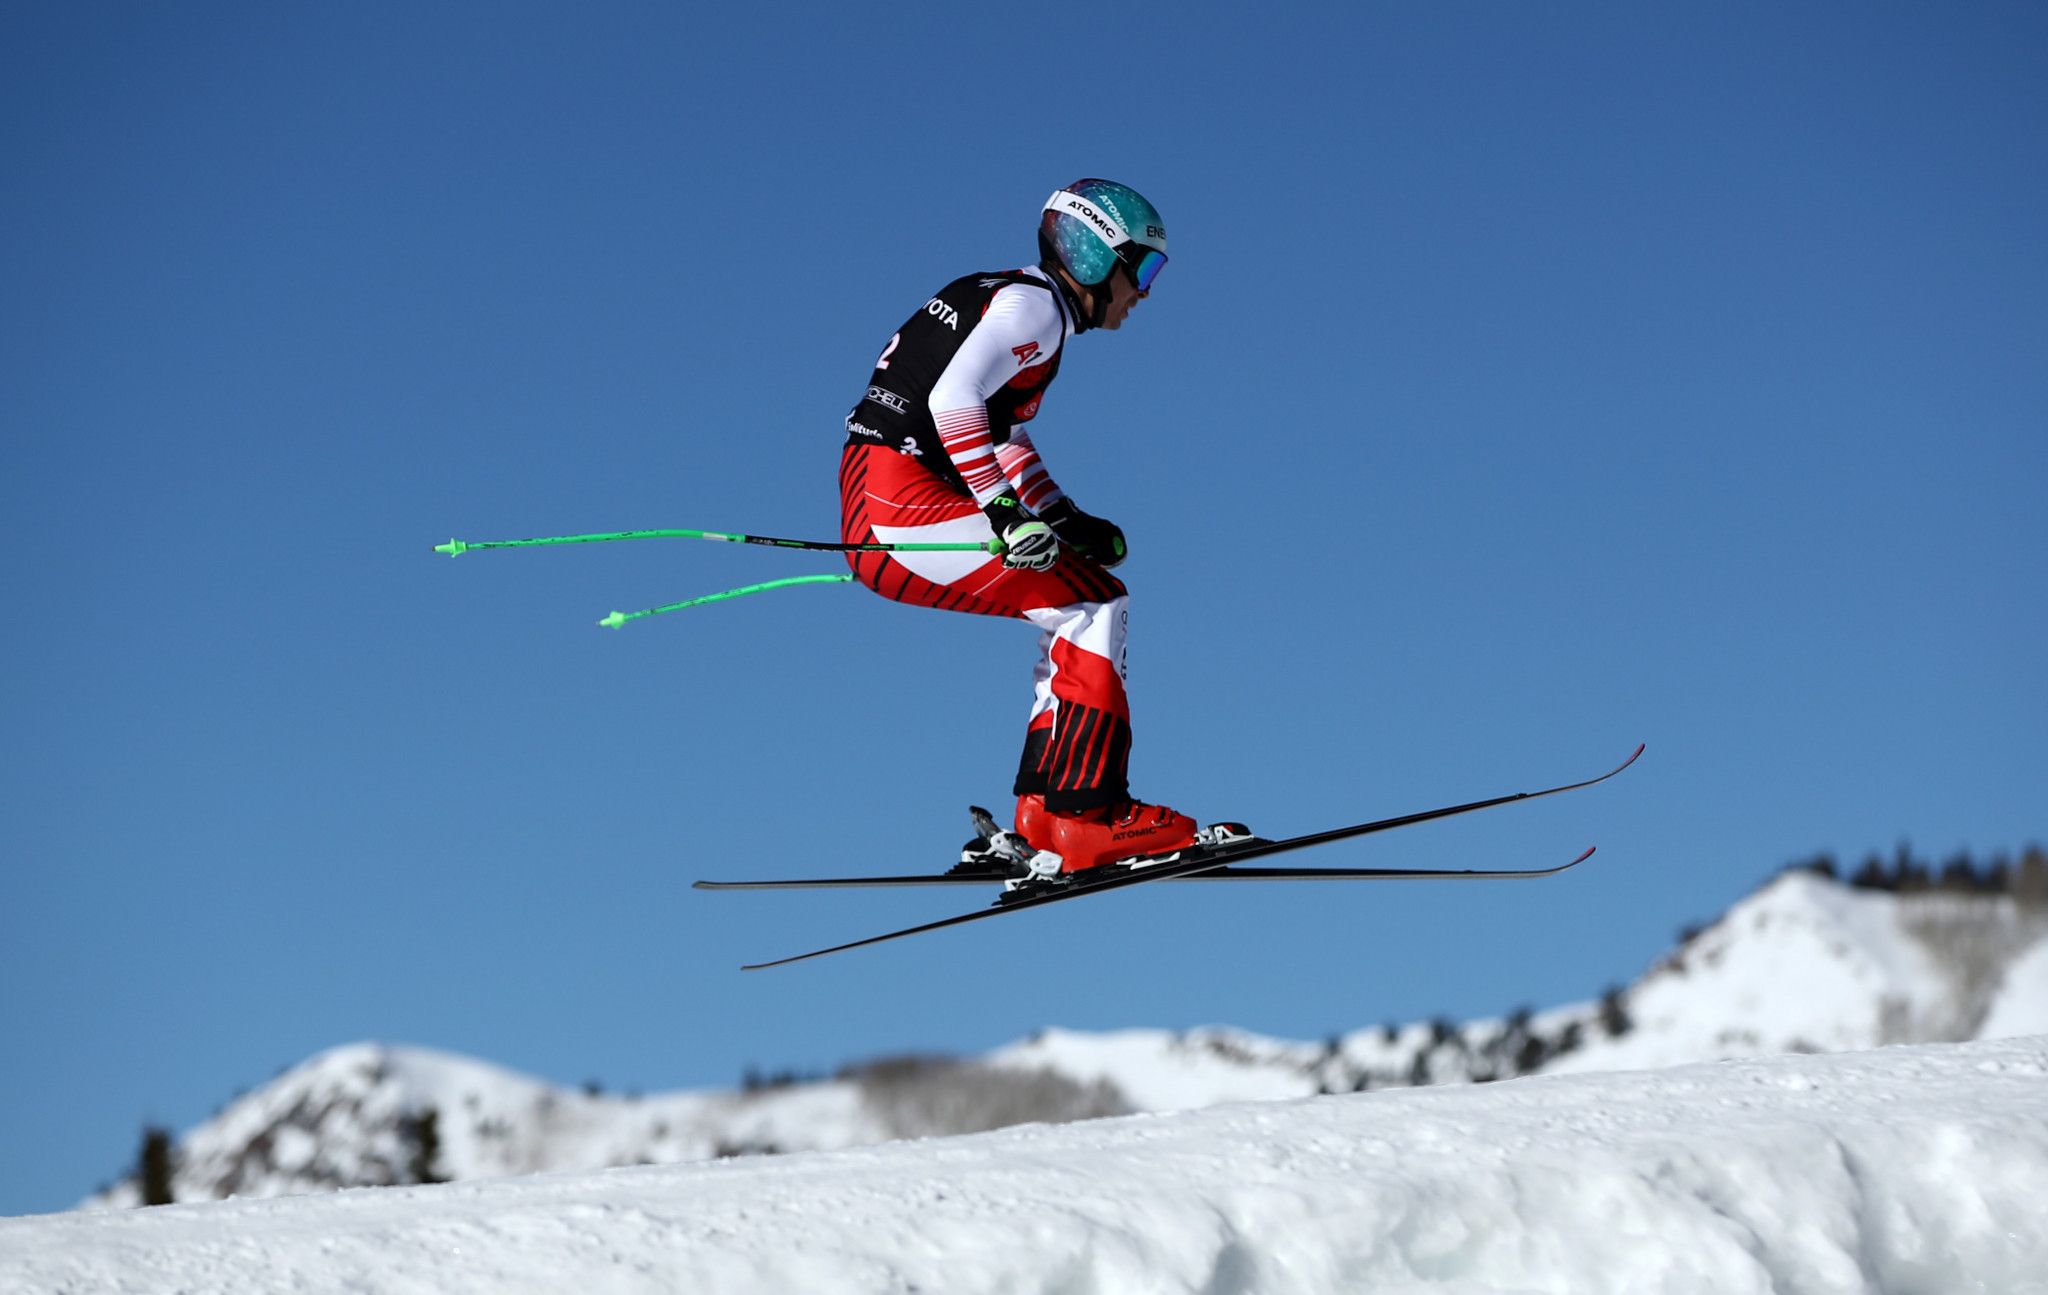 Johannes Rohrweck was the winner of the men's event at the FIS Ski Cross World Cup in Reiteralm ©Getty Images